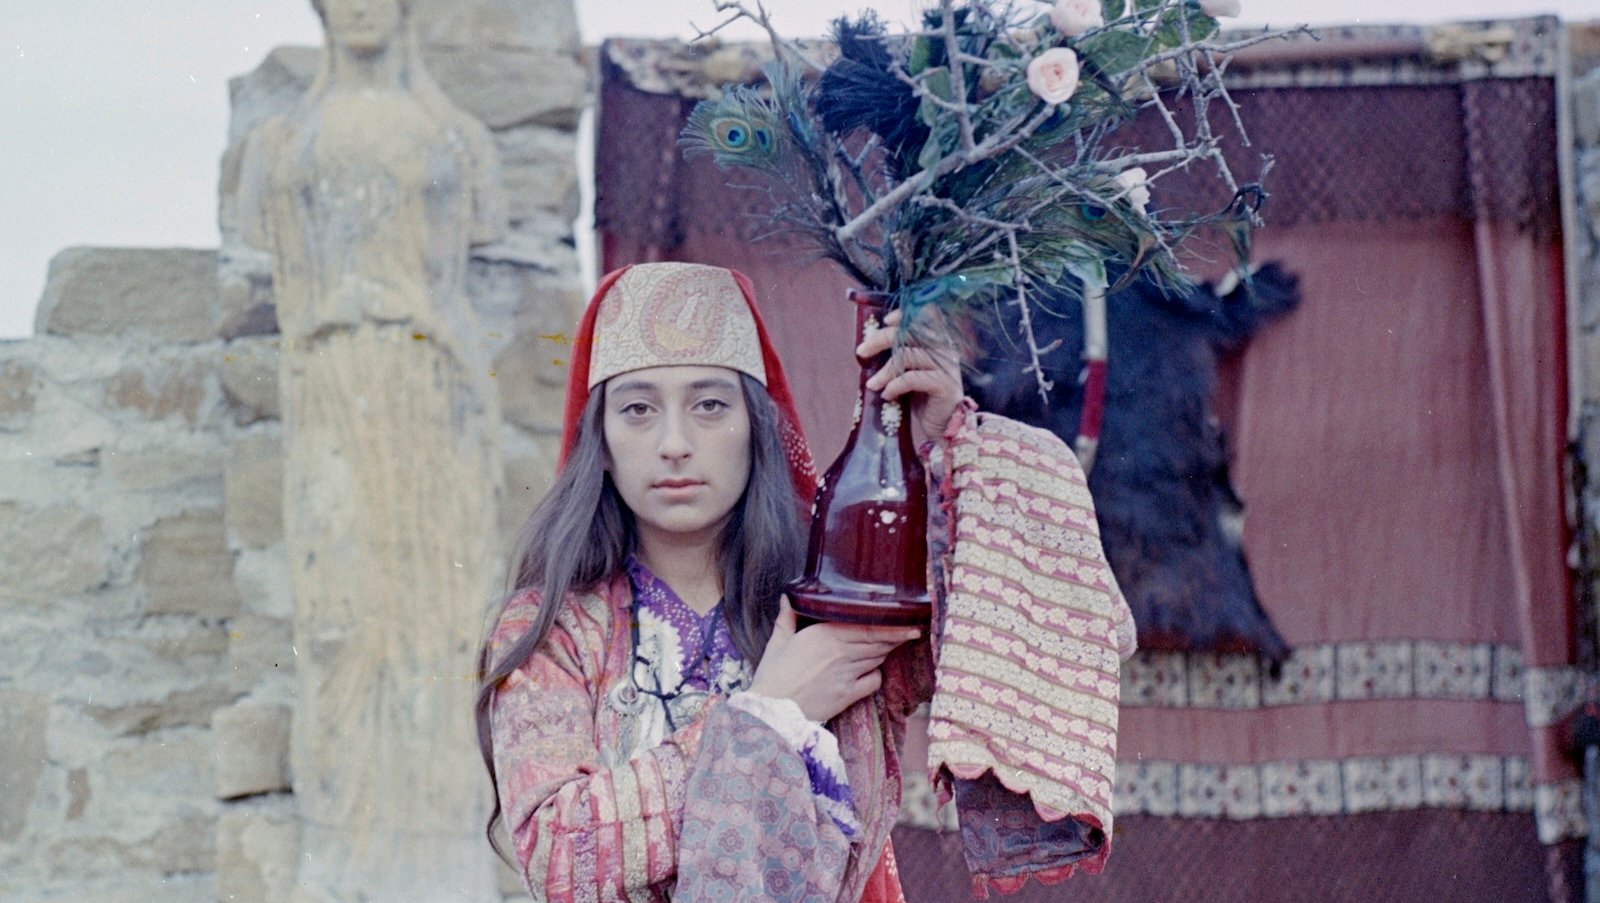 A person with long dark hair and dressed in colorful patterns and a middle-eastern style hat stands in front of a curtain draped outdoors on a door opening, looks ahead with a serious expression while holding up a red glass bottle full of flowers